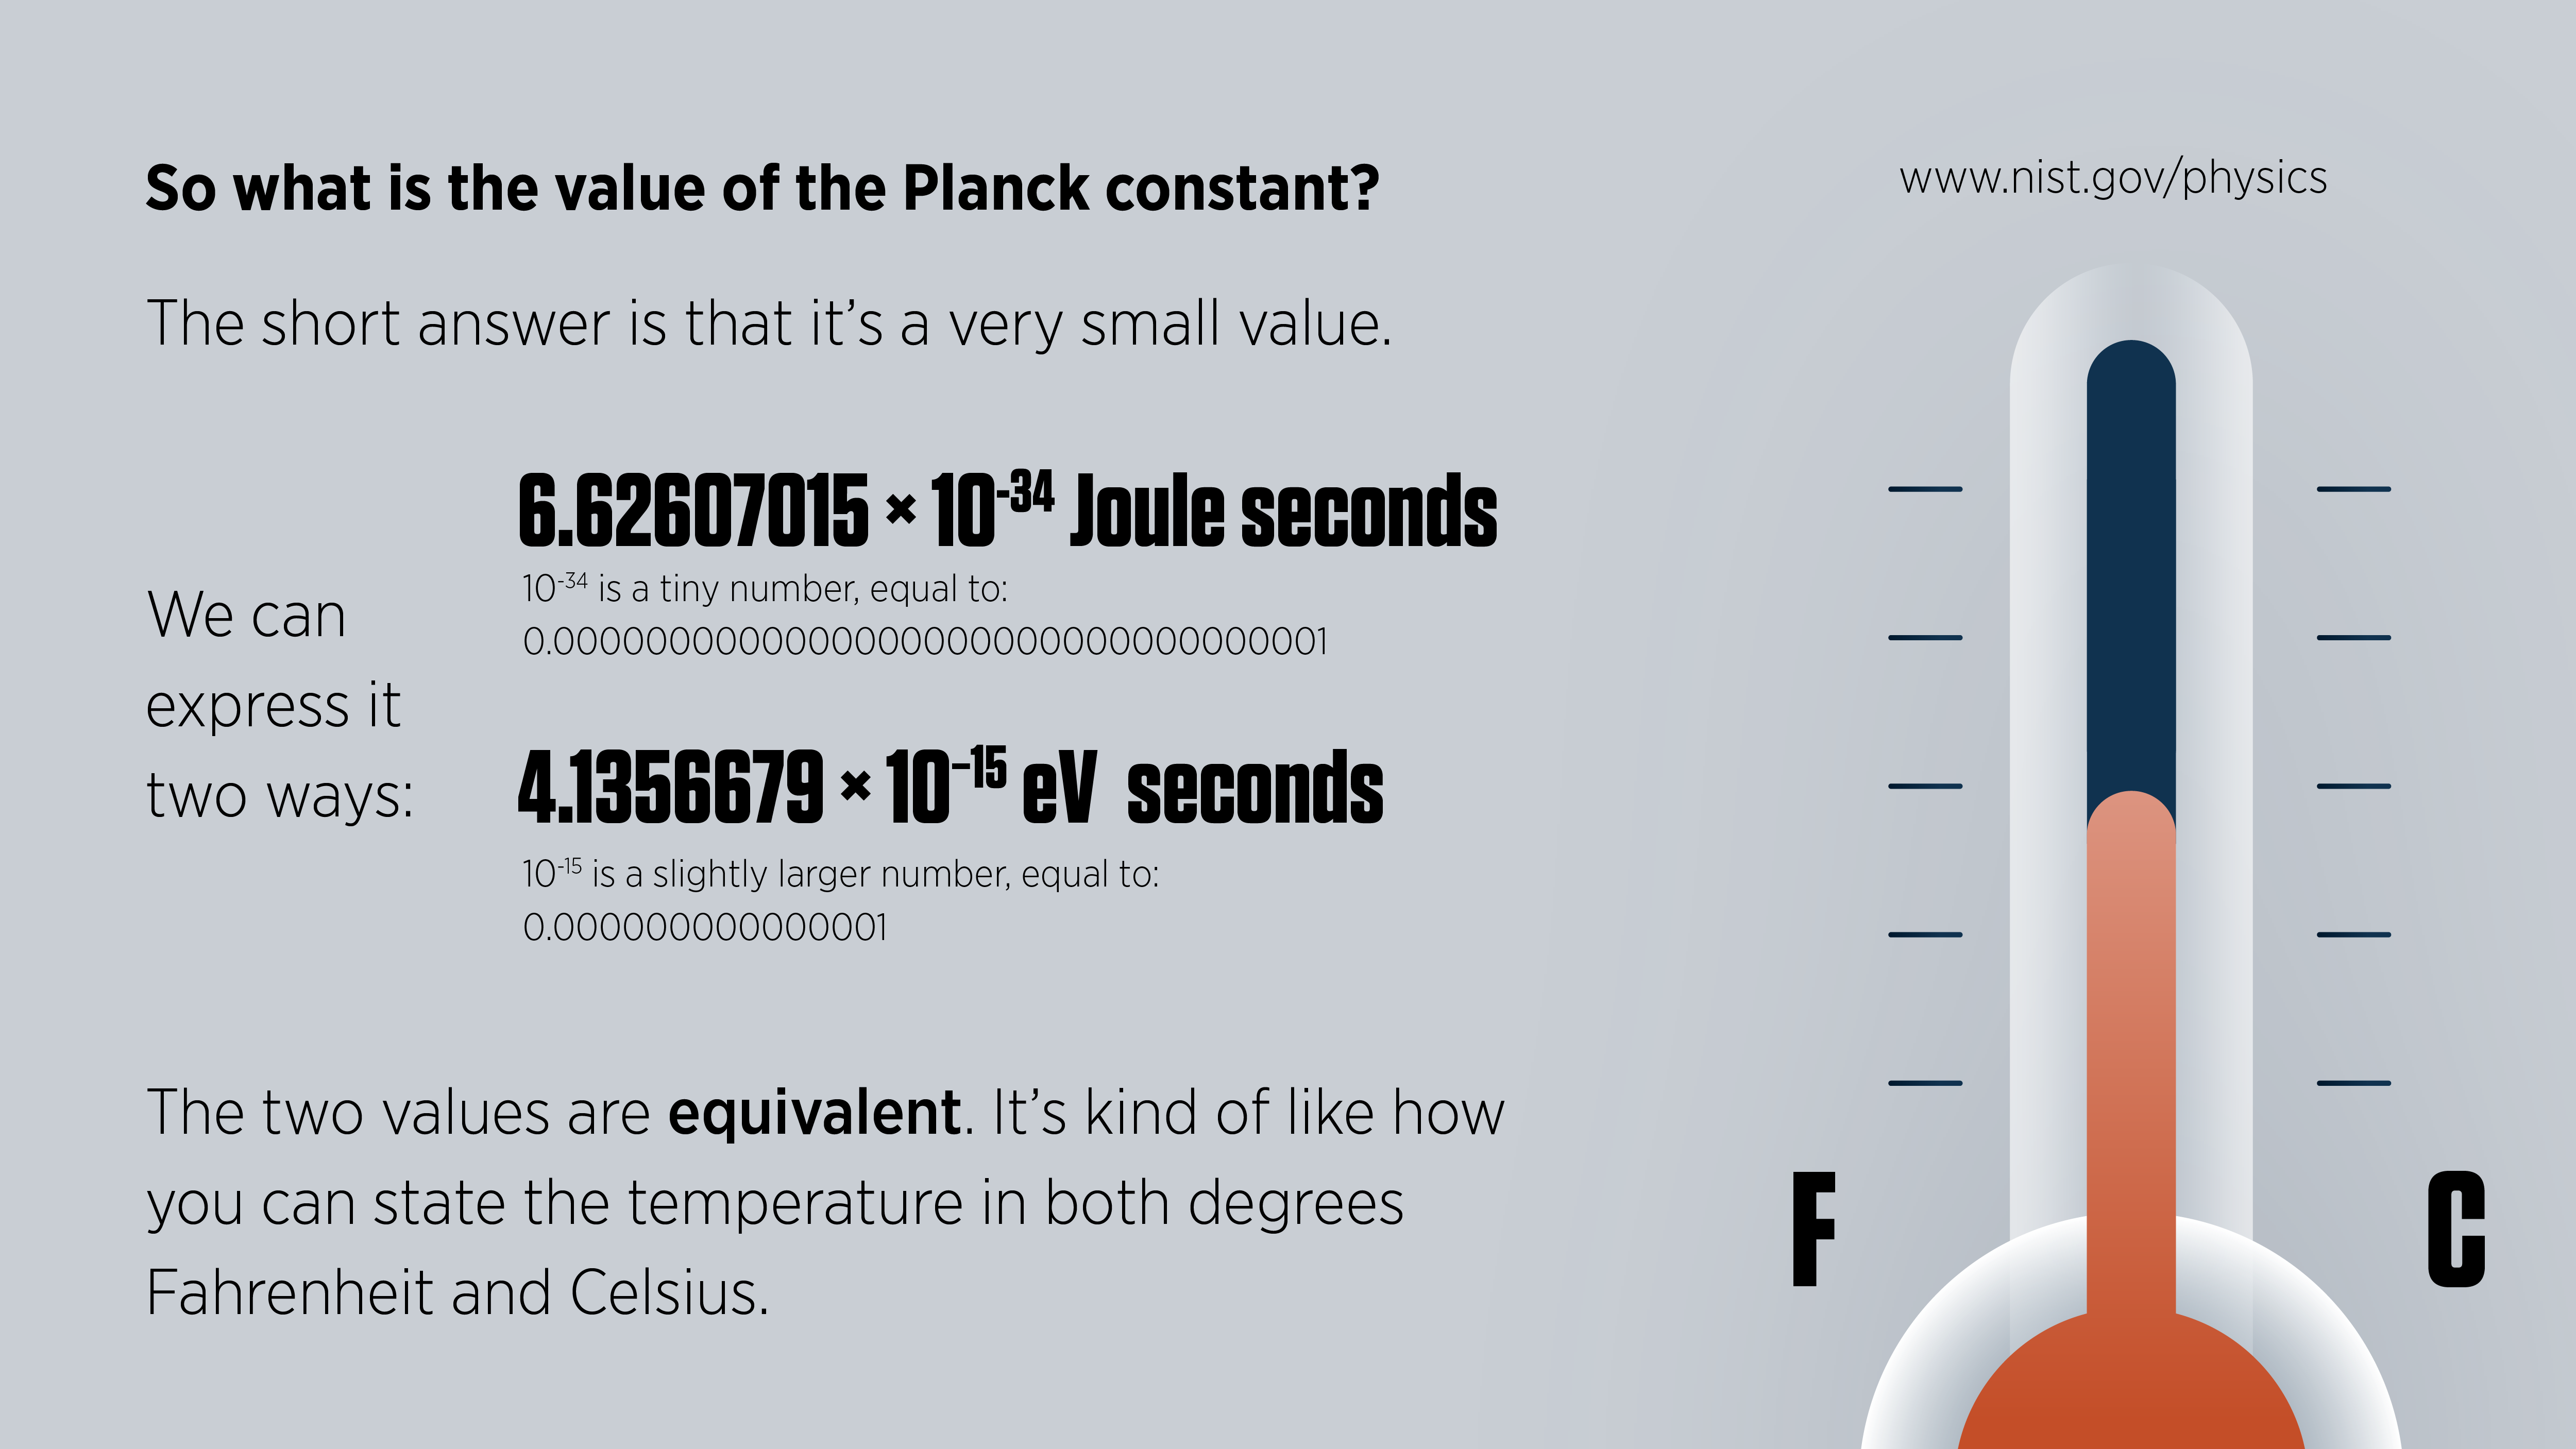 Illustration says "So what is the value of the Planck constant?" with explanation.